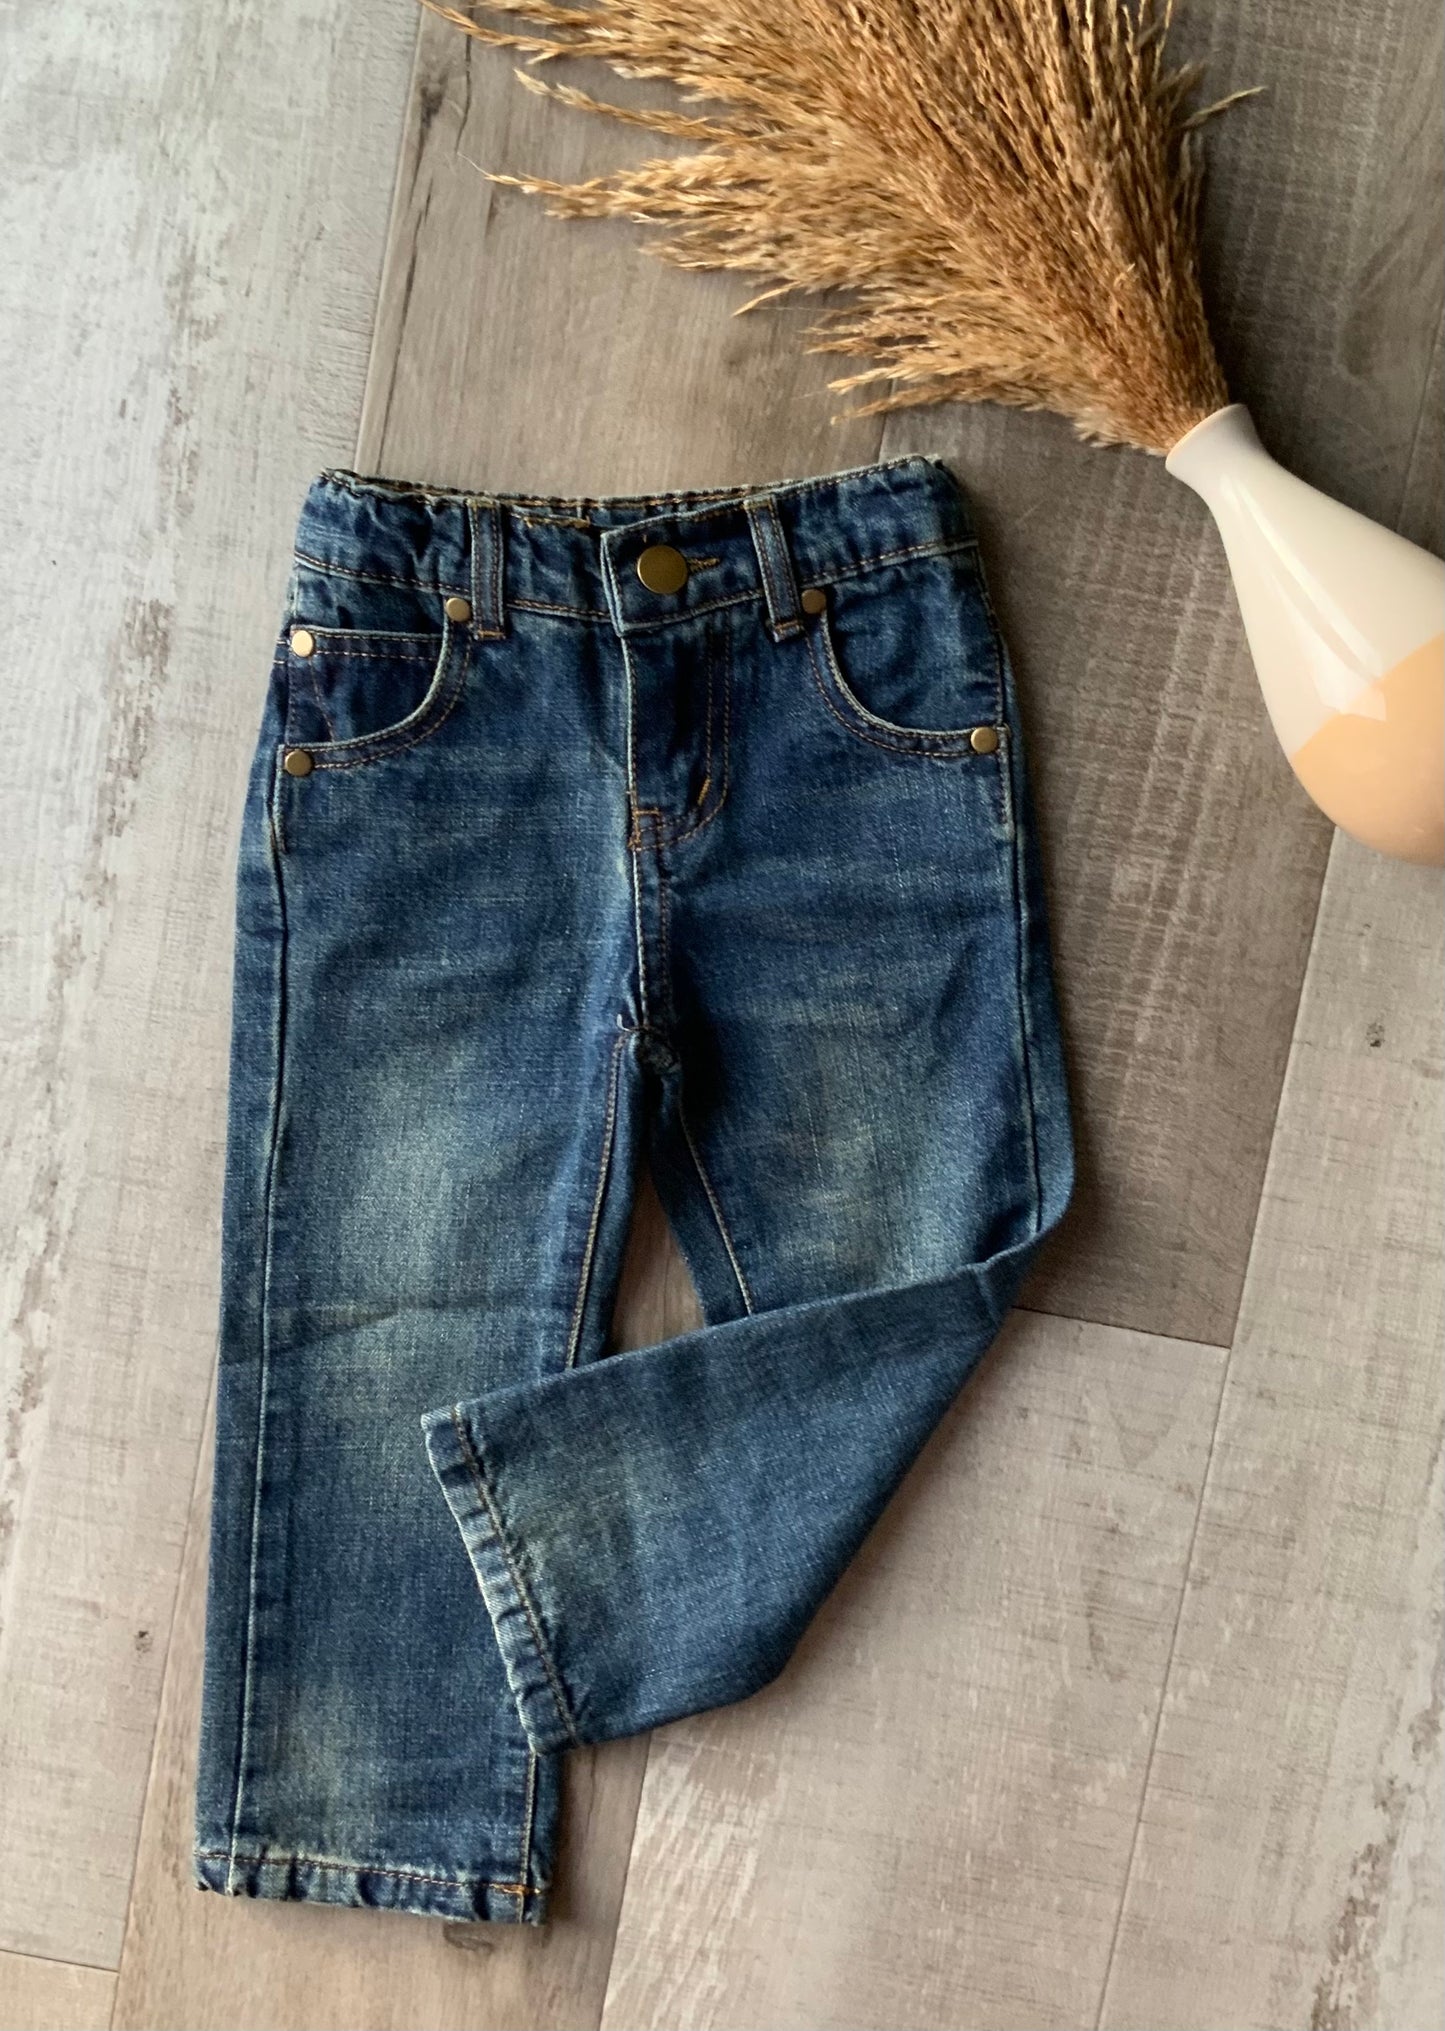 Boys Denim Relaxed Fit Jeans